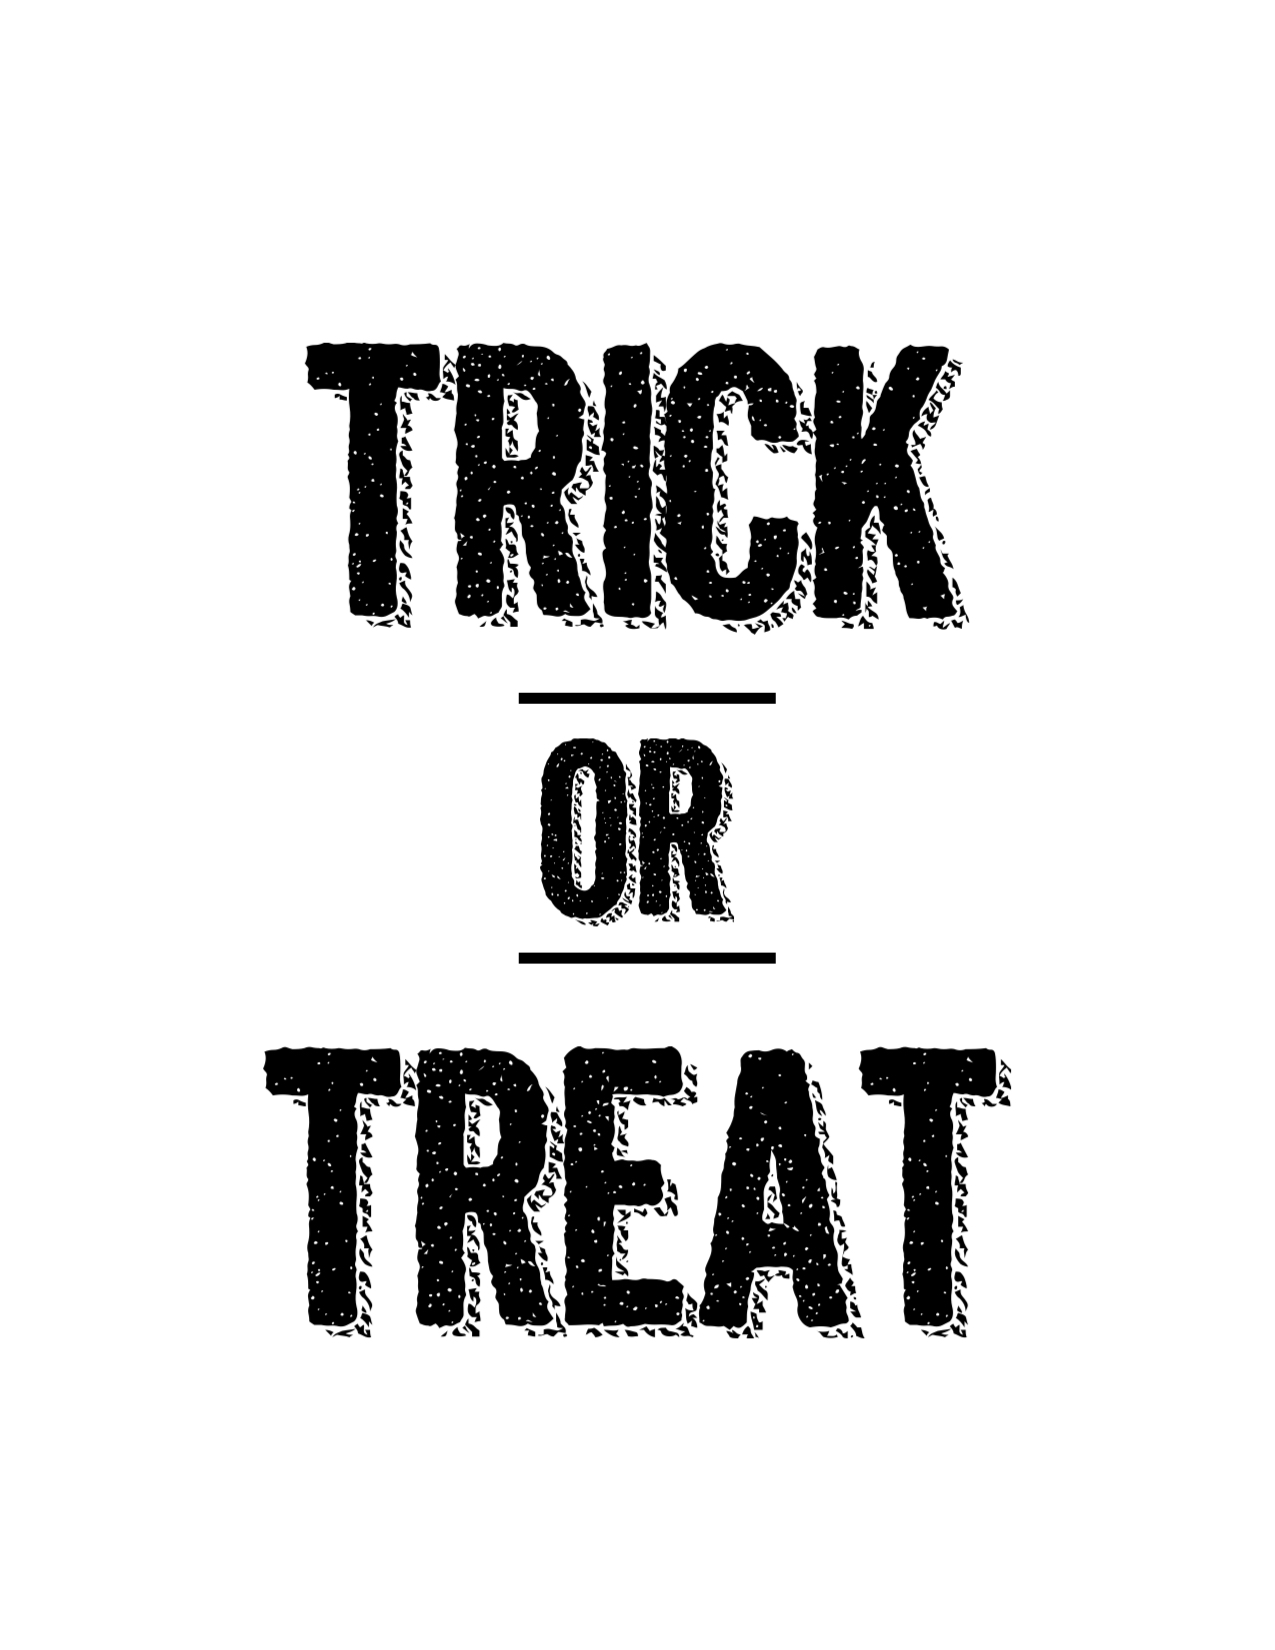 Halloween Trick or Treat Free Printable - Paper Trail Design